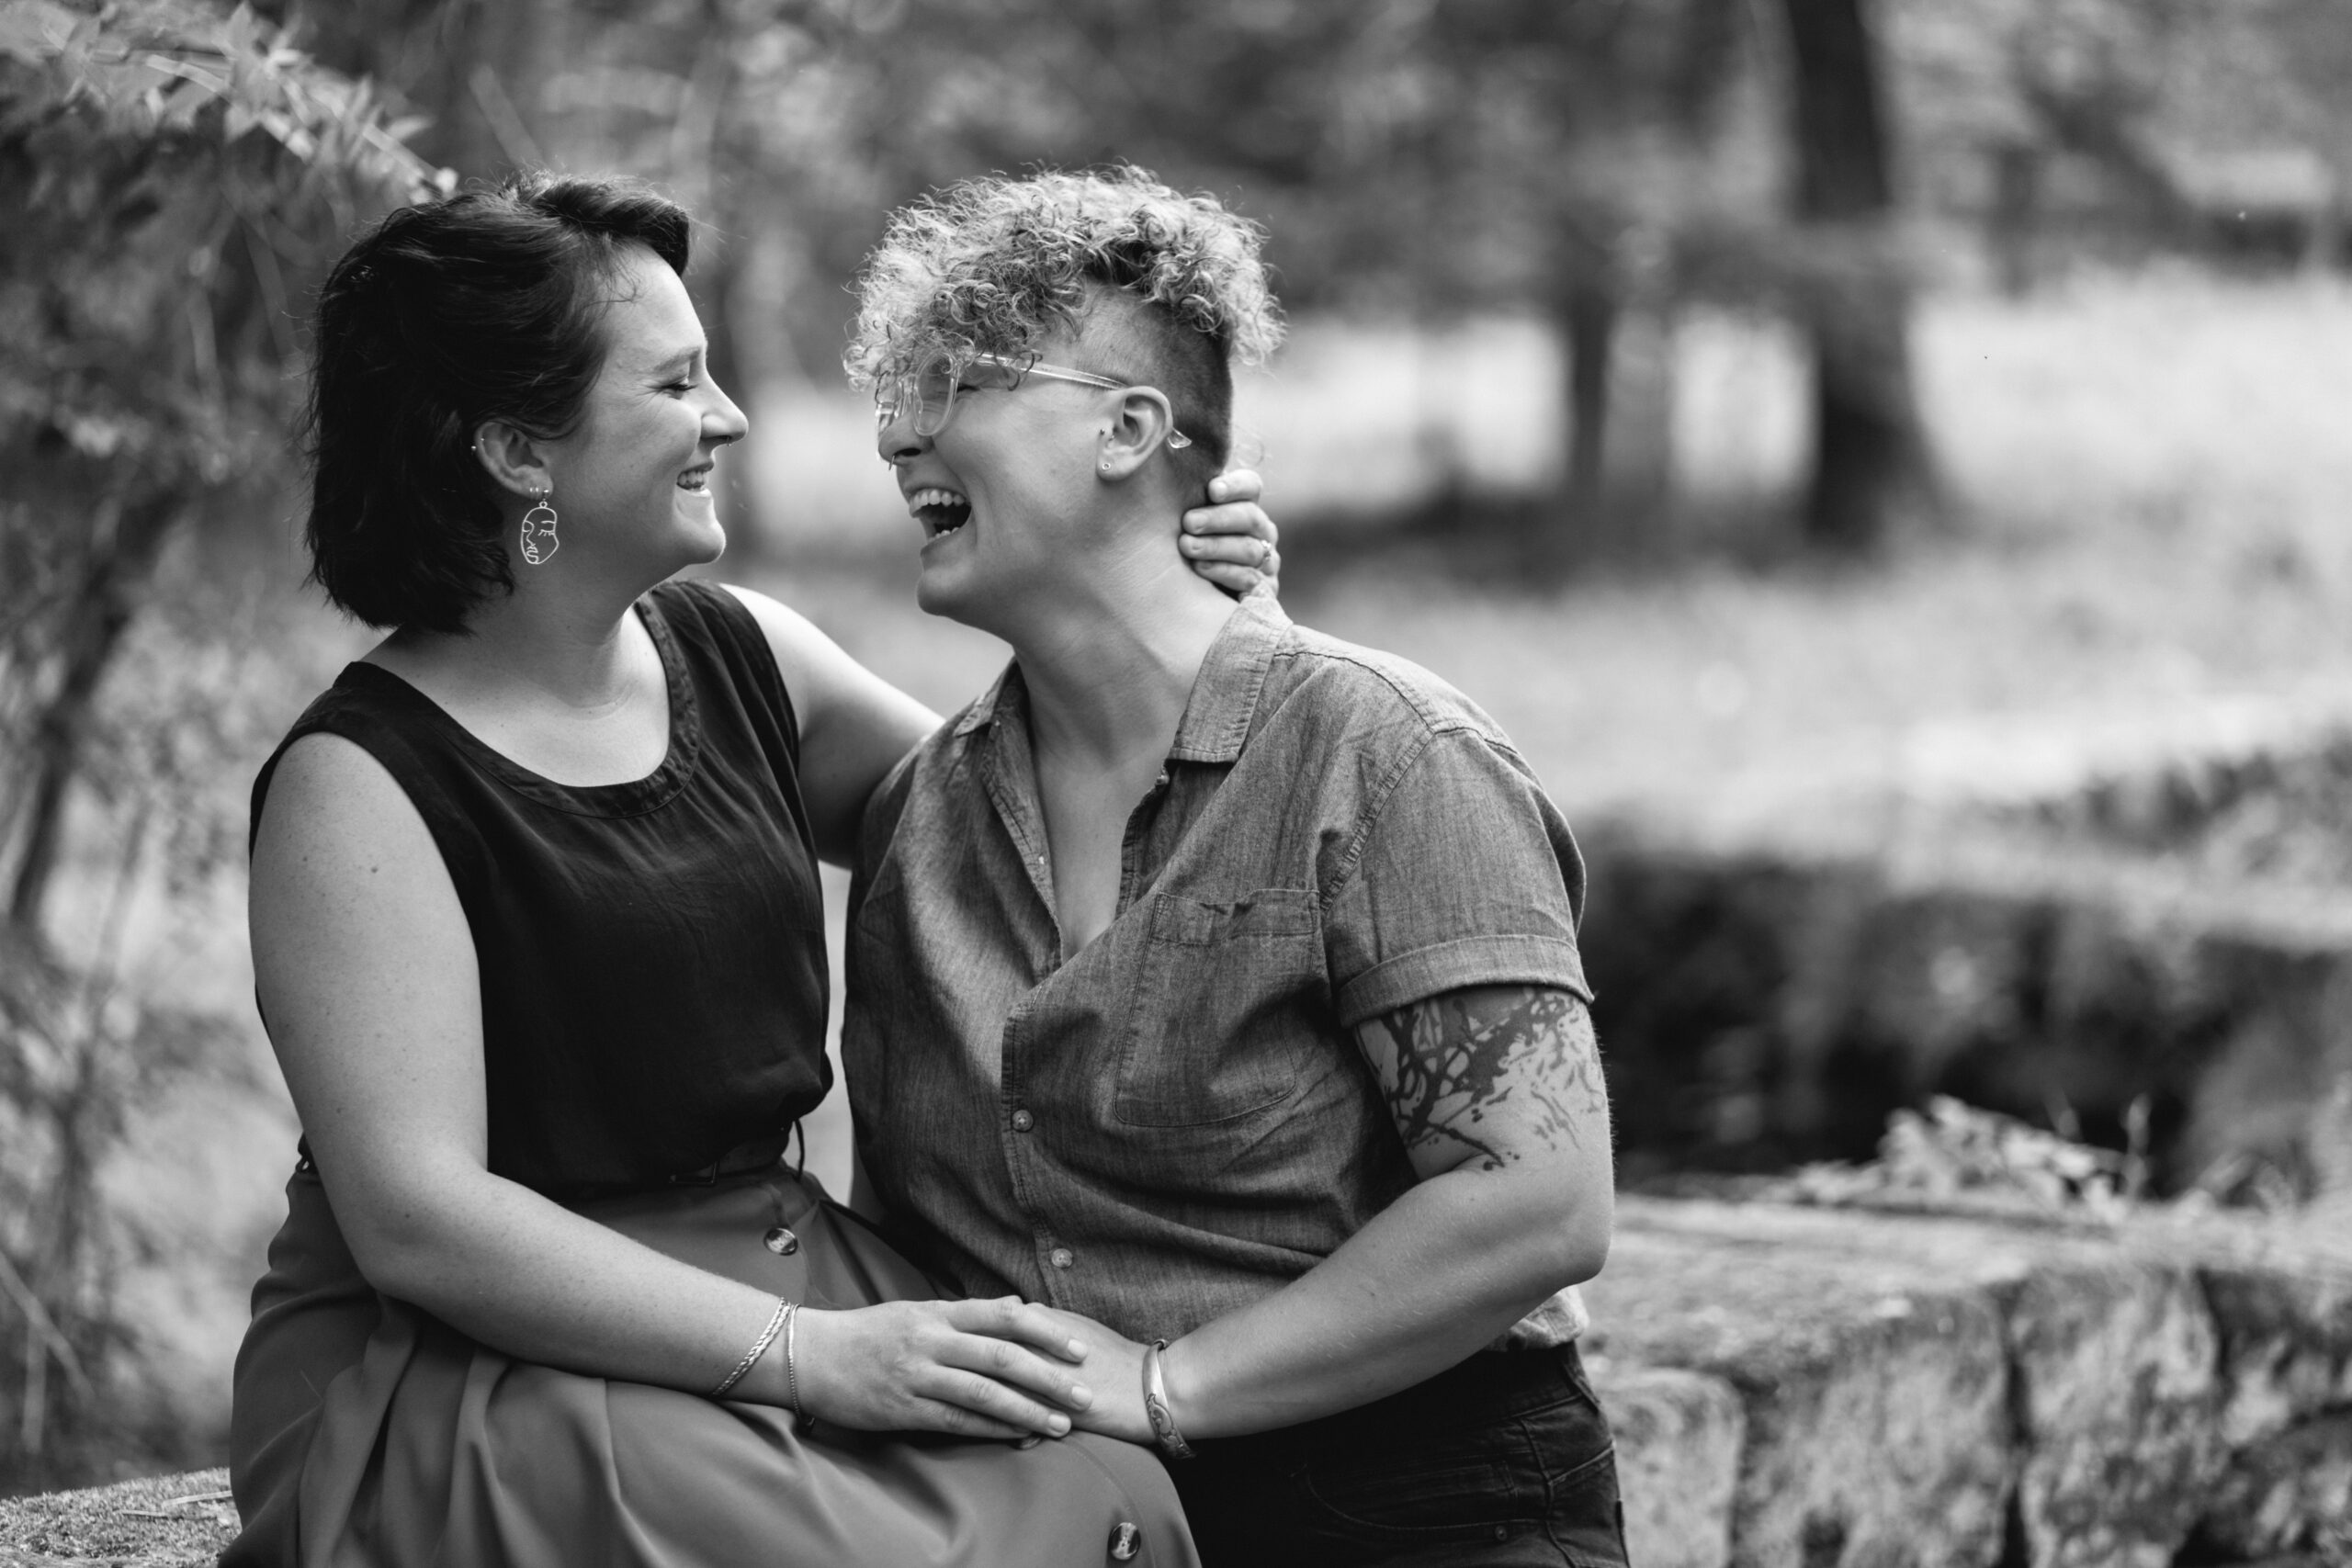 A lesbian couple, one sitting on a stone wall and the other standing, holding her hand, looks at each other and laughs. The image is black and white.